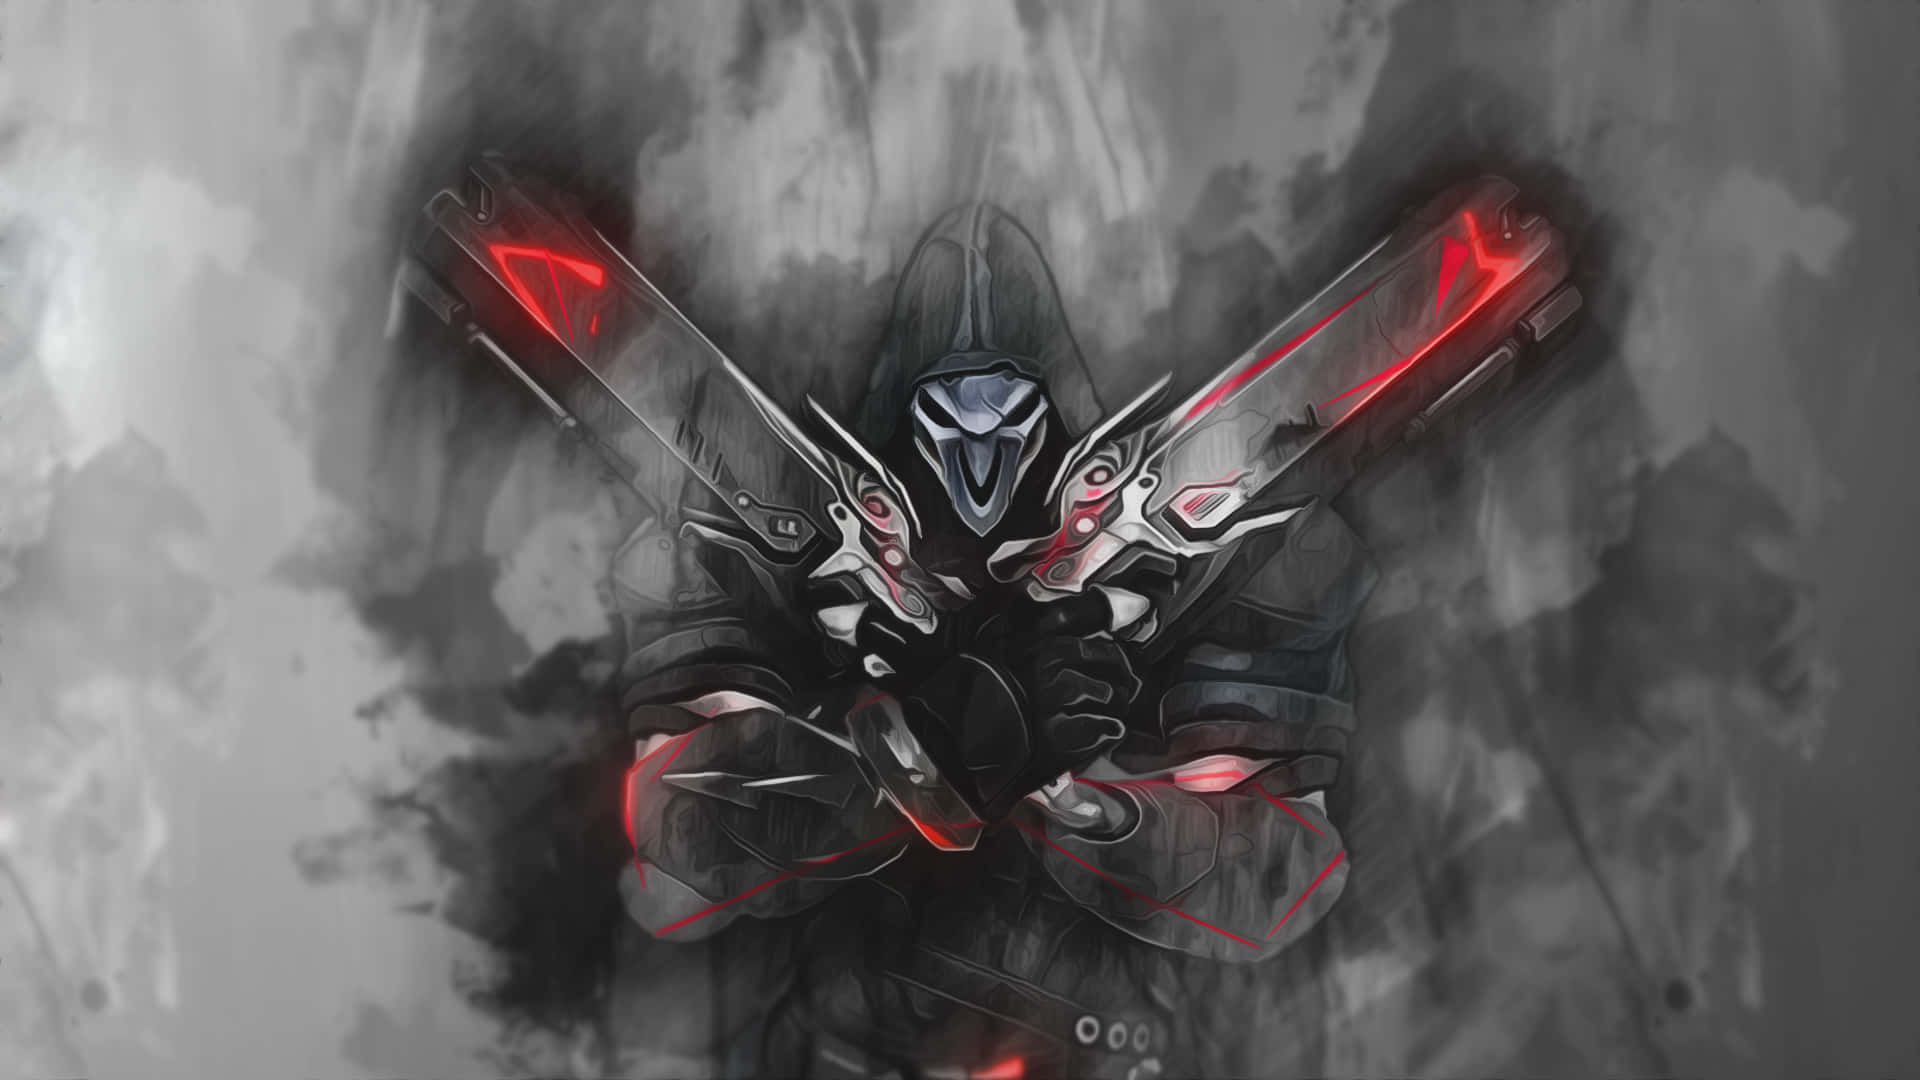 Experience the darkness of Overwatch with Reaper Wallpaper